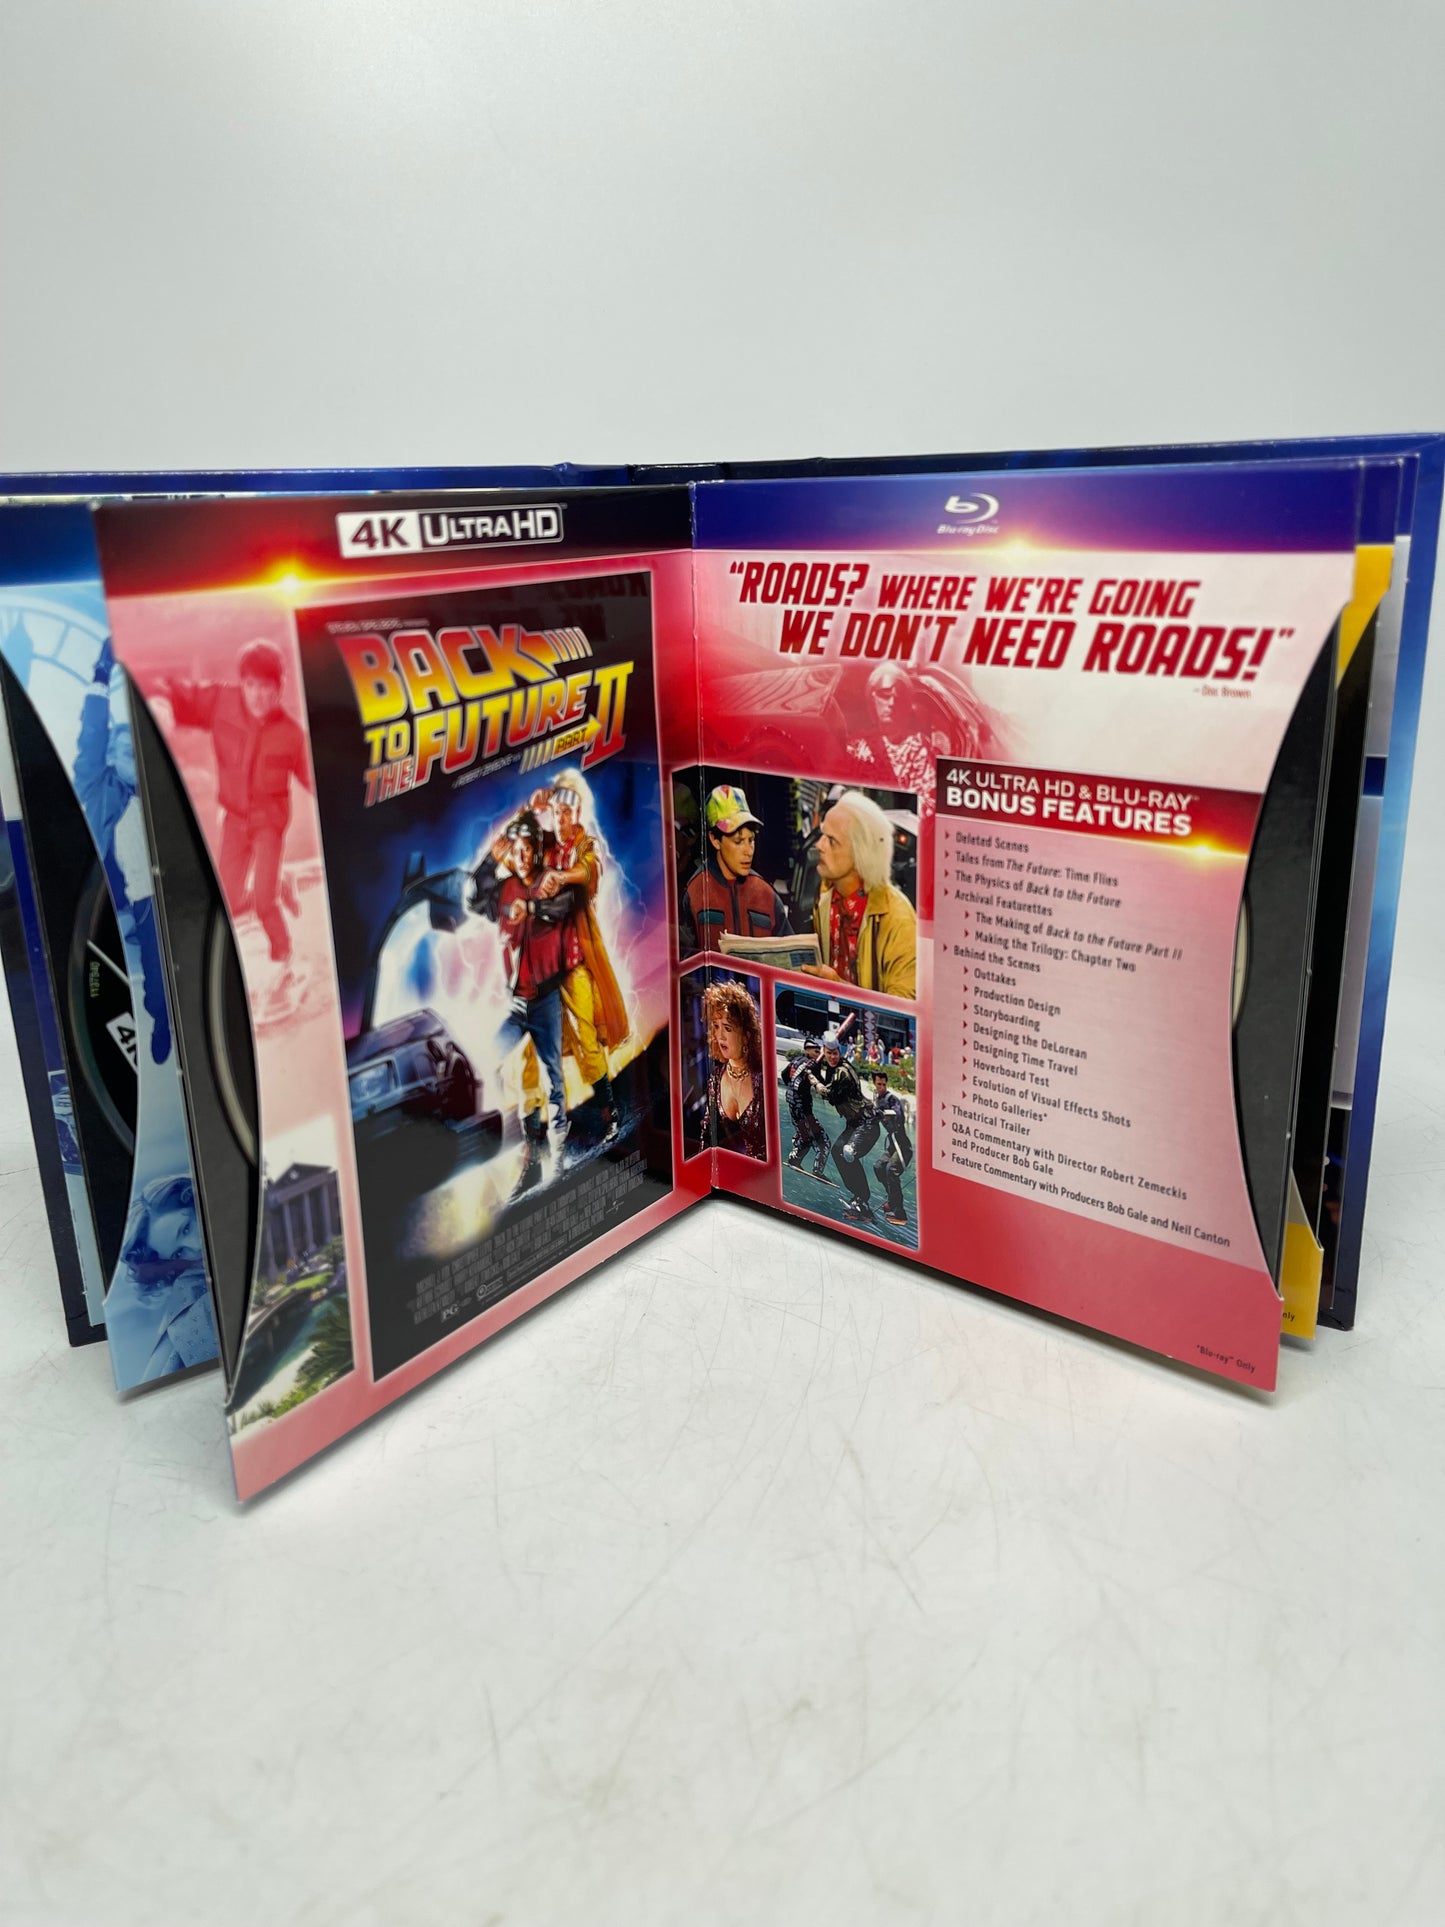 Back To The Future: The Ultimate Trilogy 4K Ultra HD DVD Complete Set